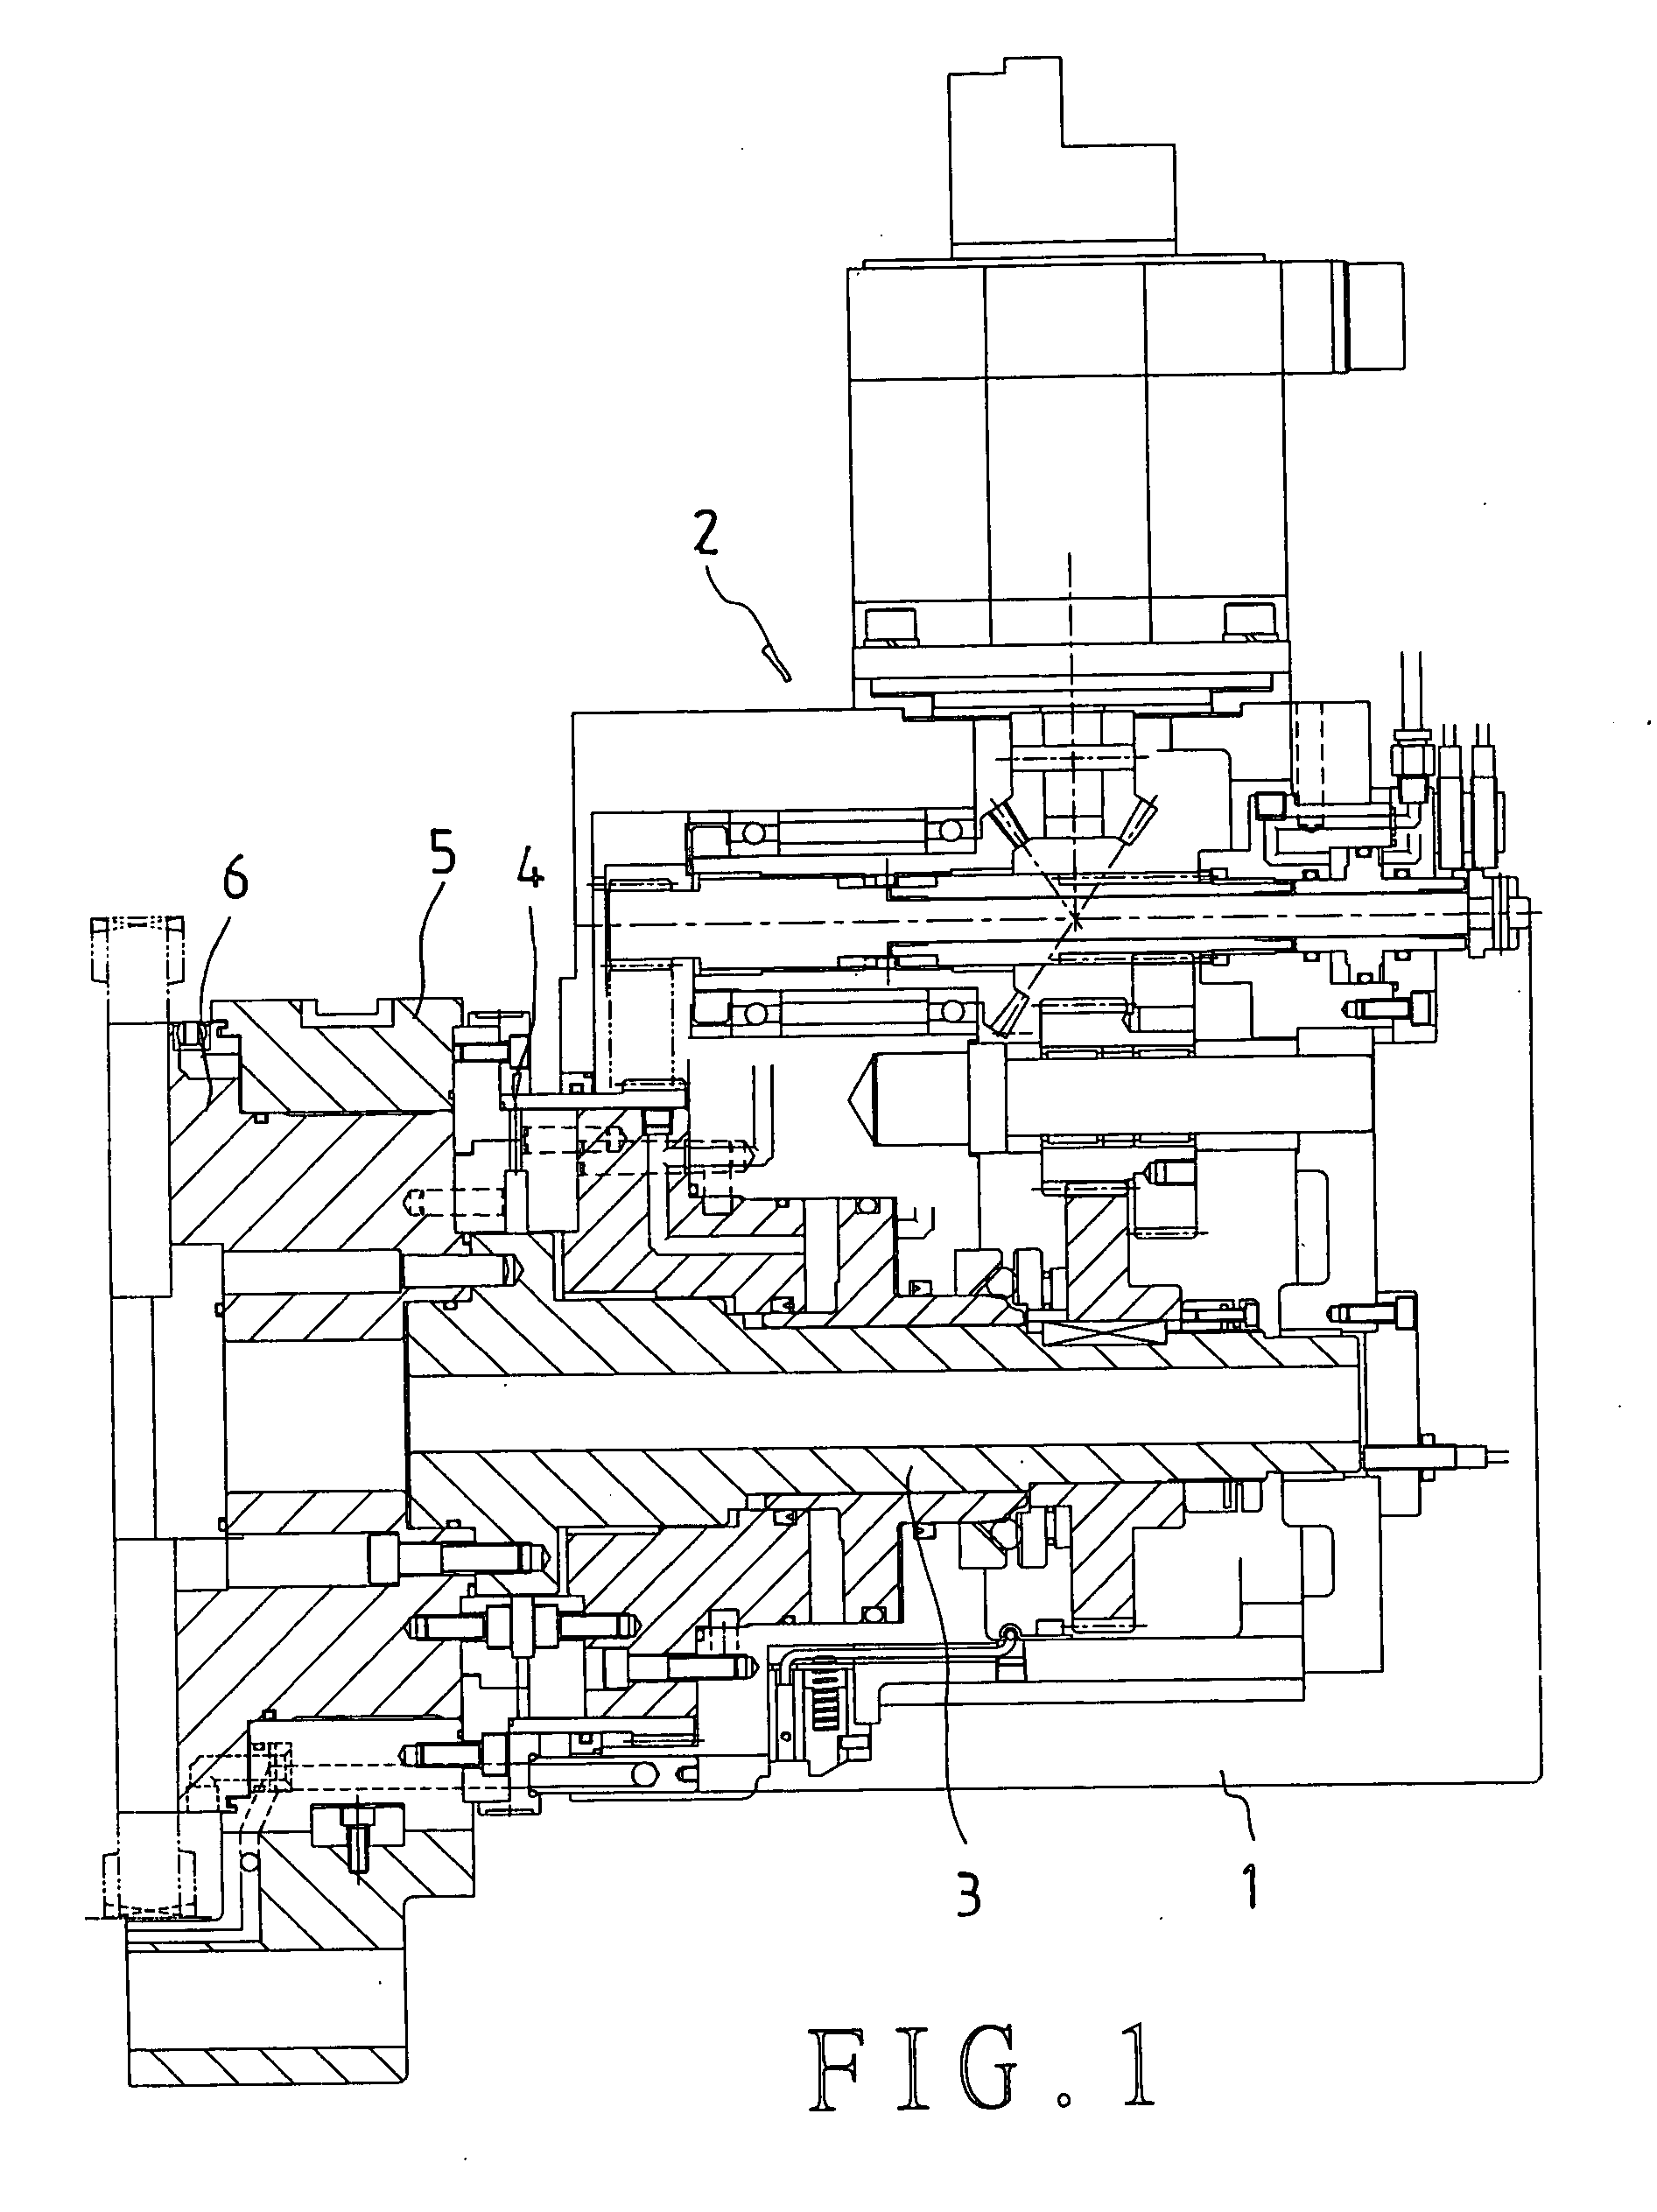 Structure of a twin disc type tool turret mechanism for CNC machines